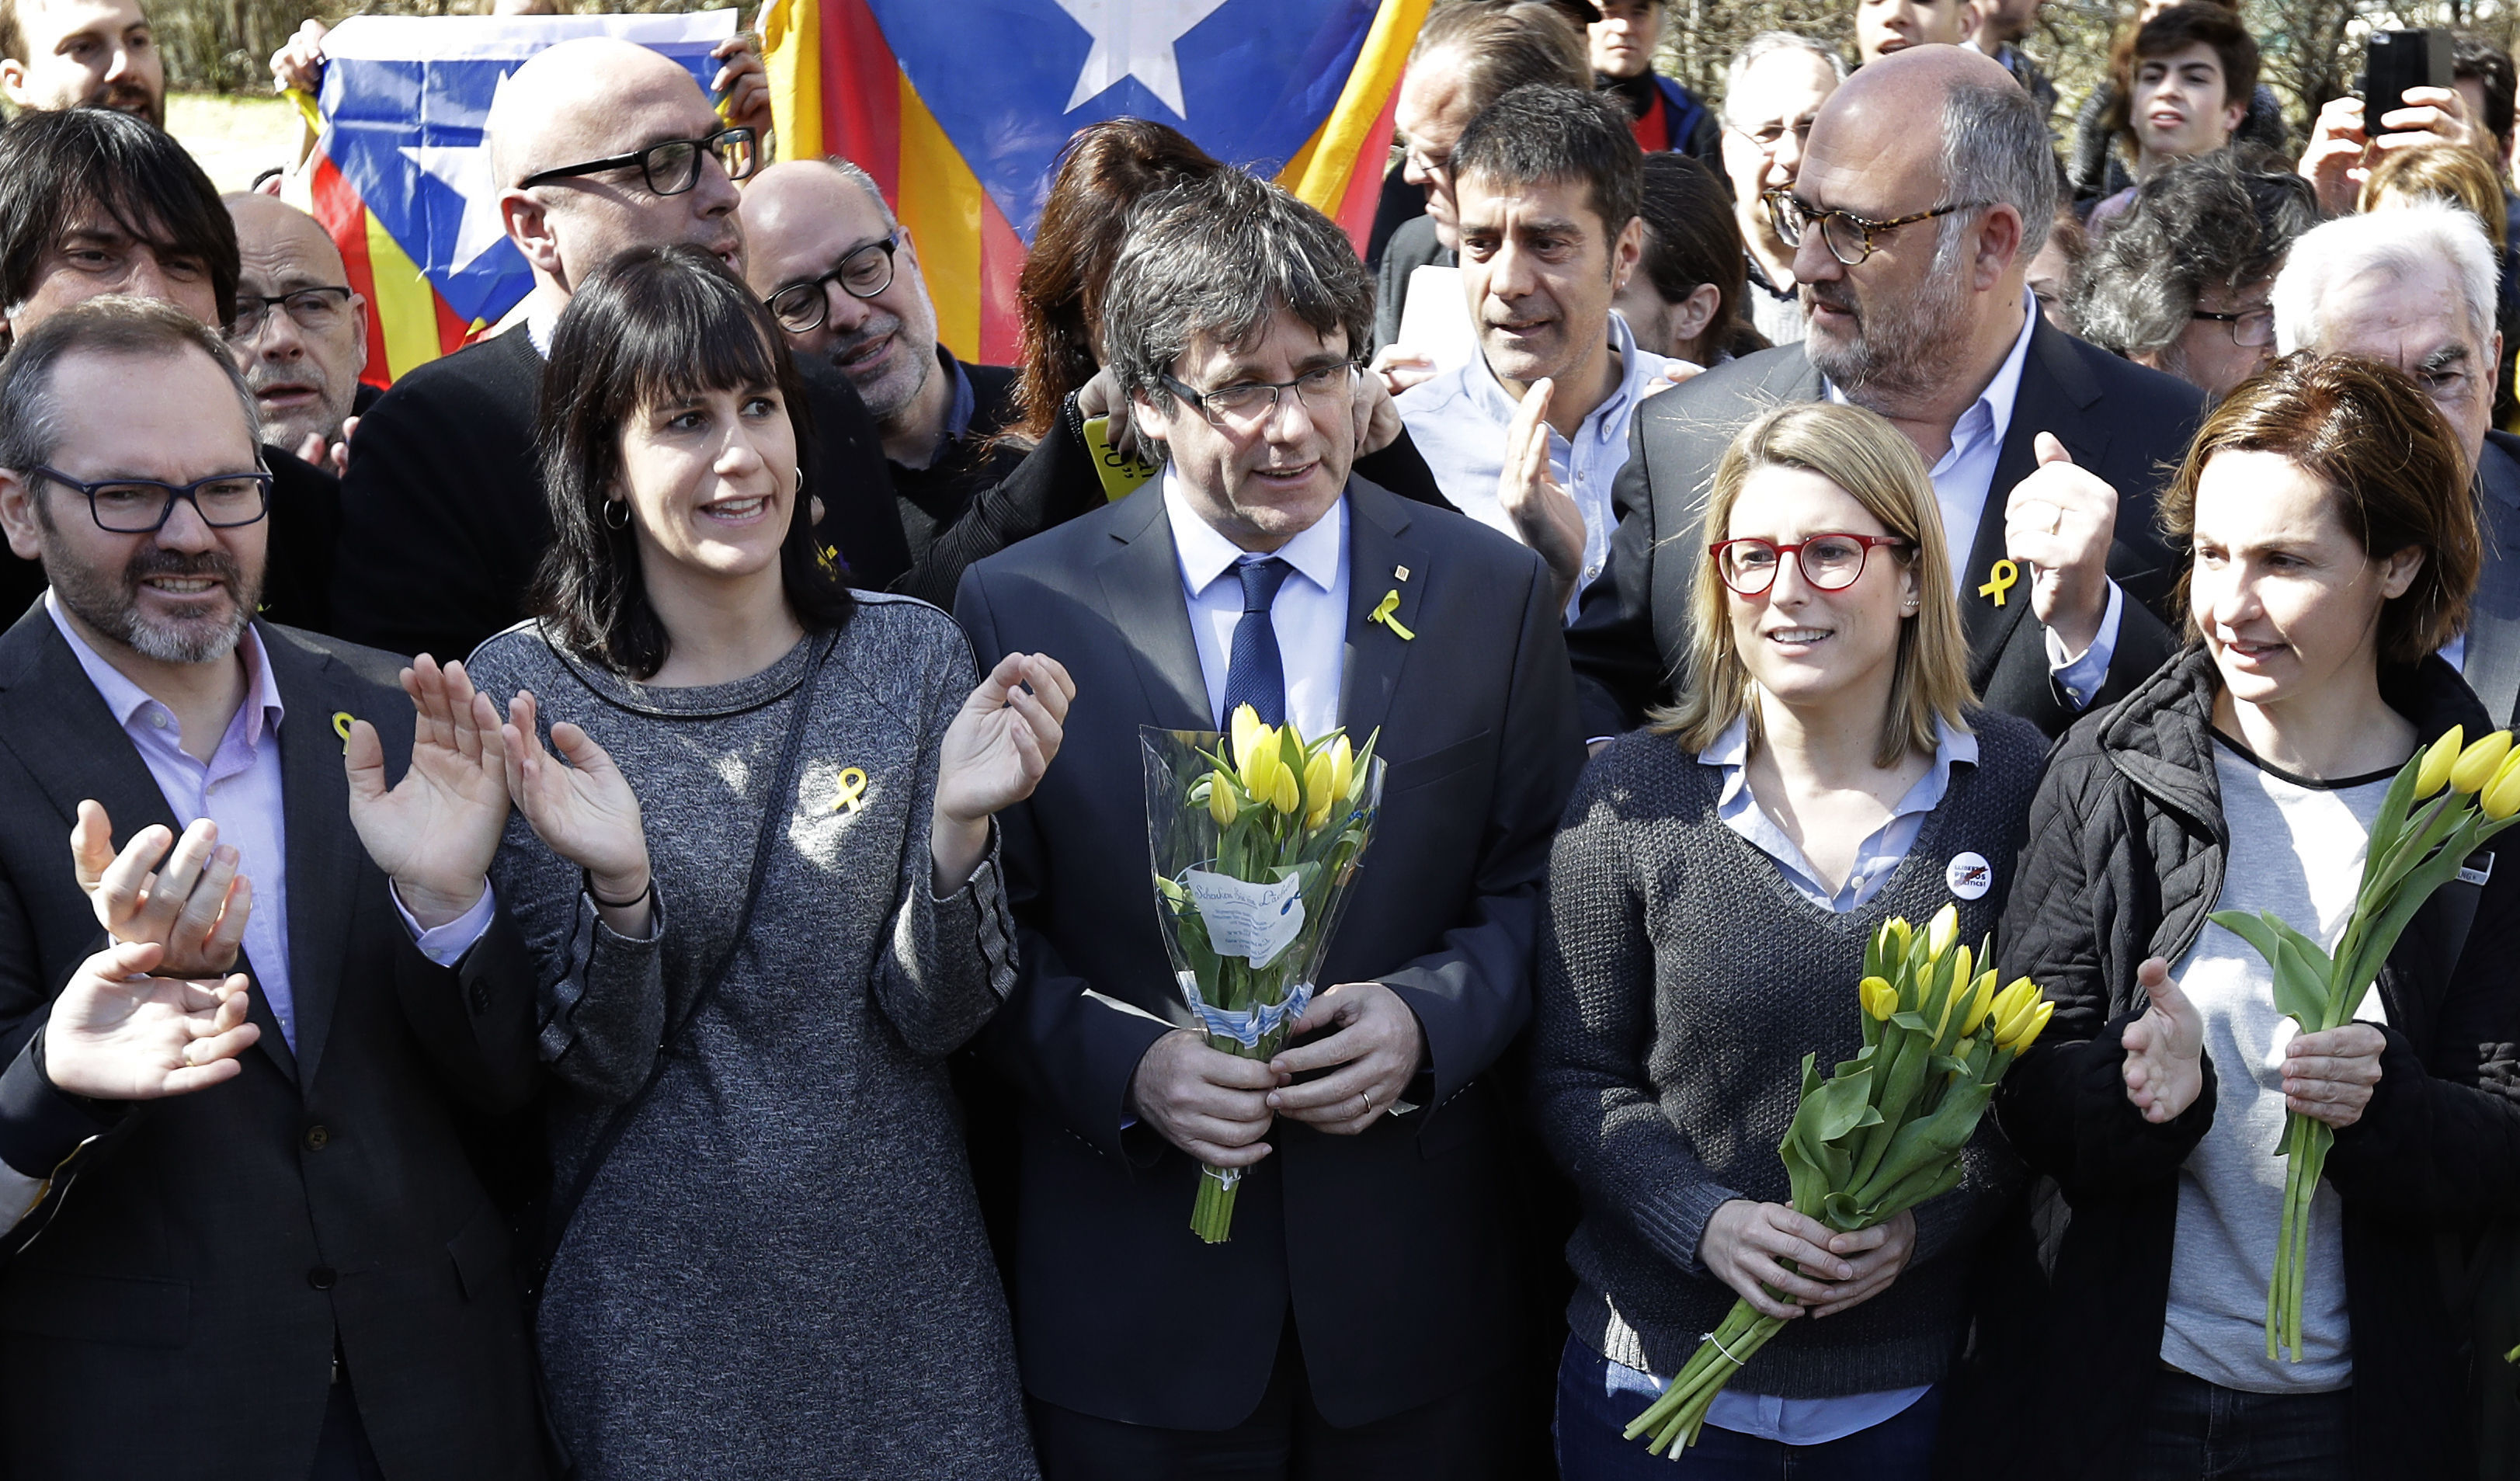 Carles Puigdemont holds a bunch of flowers as he and supporters sing after a news conference in Berlin (Michael Sohn/AP)